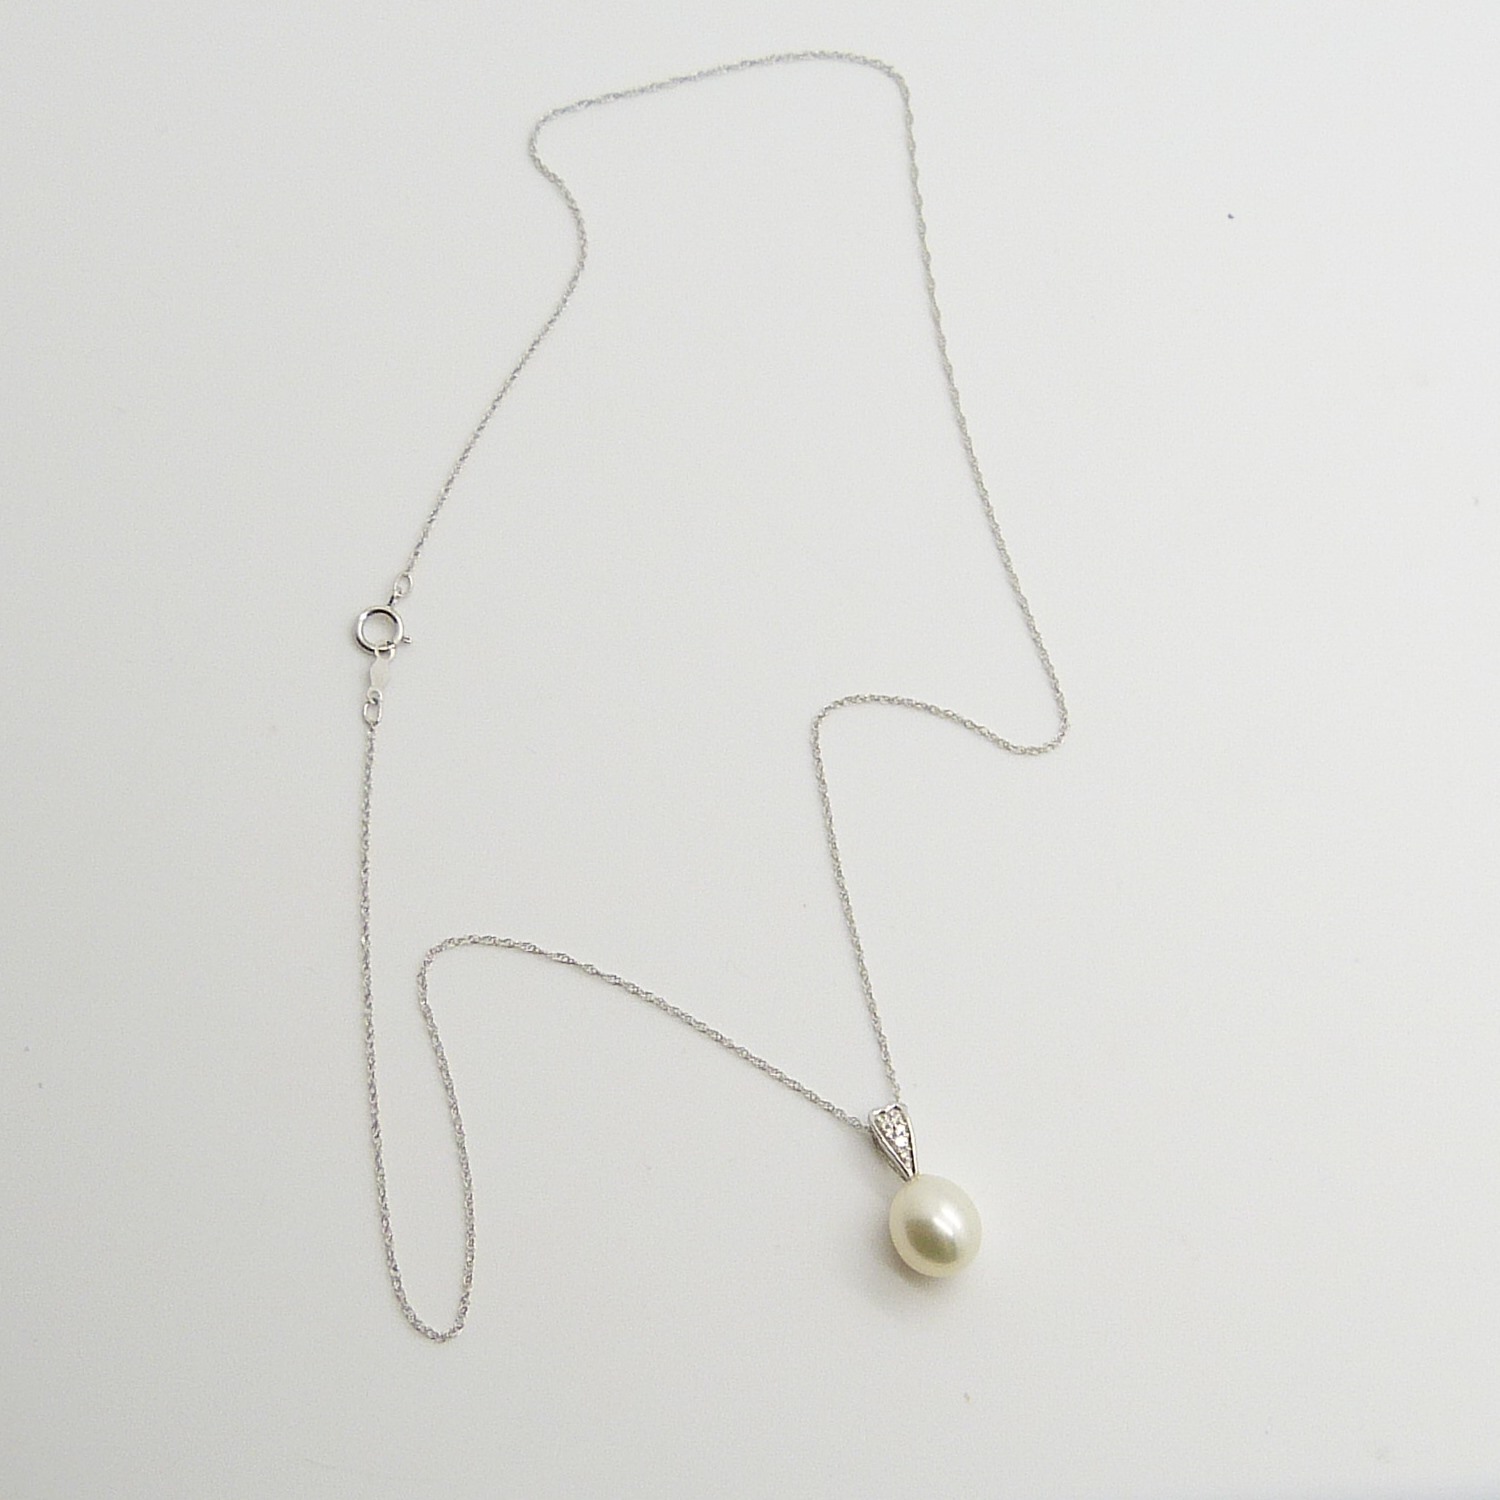 White Gold Necklace. Pendant Features An Oval Cultured Pearl and Diamond-Set Bale - Image 6 of 6